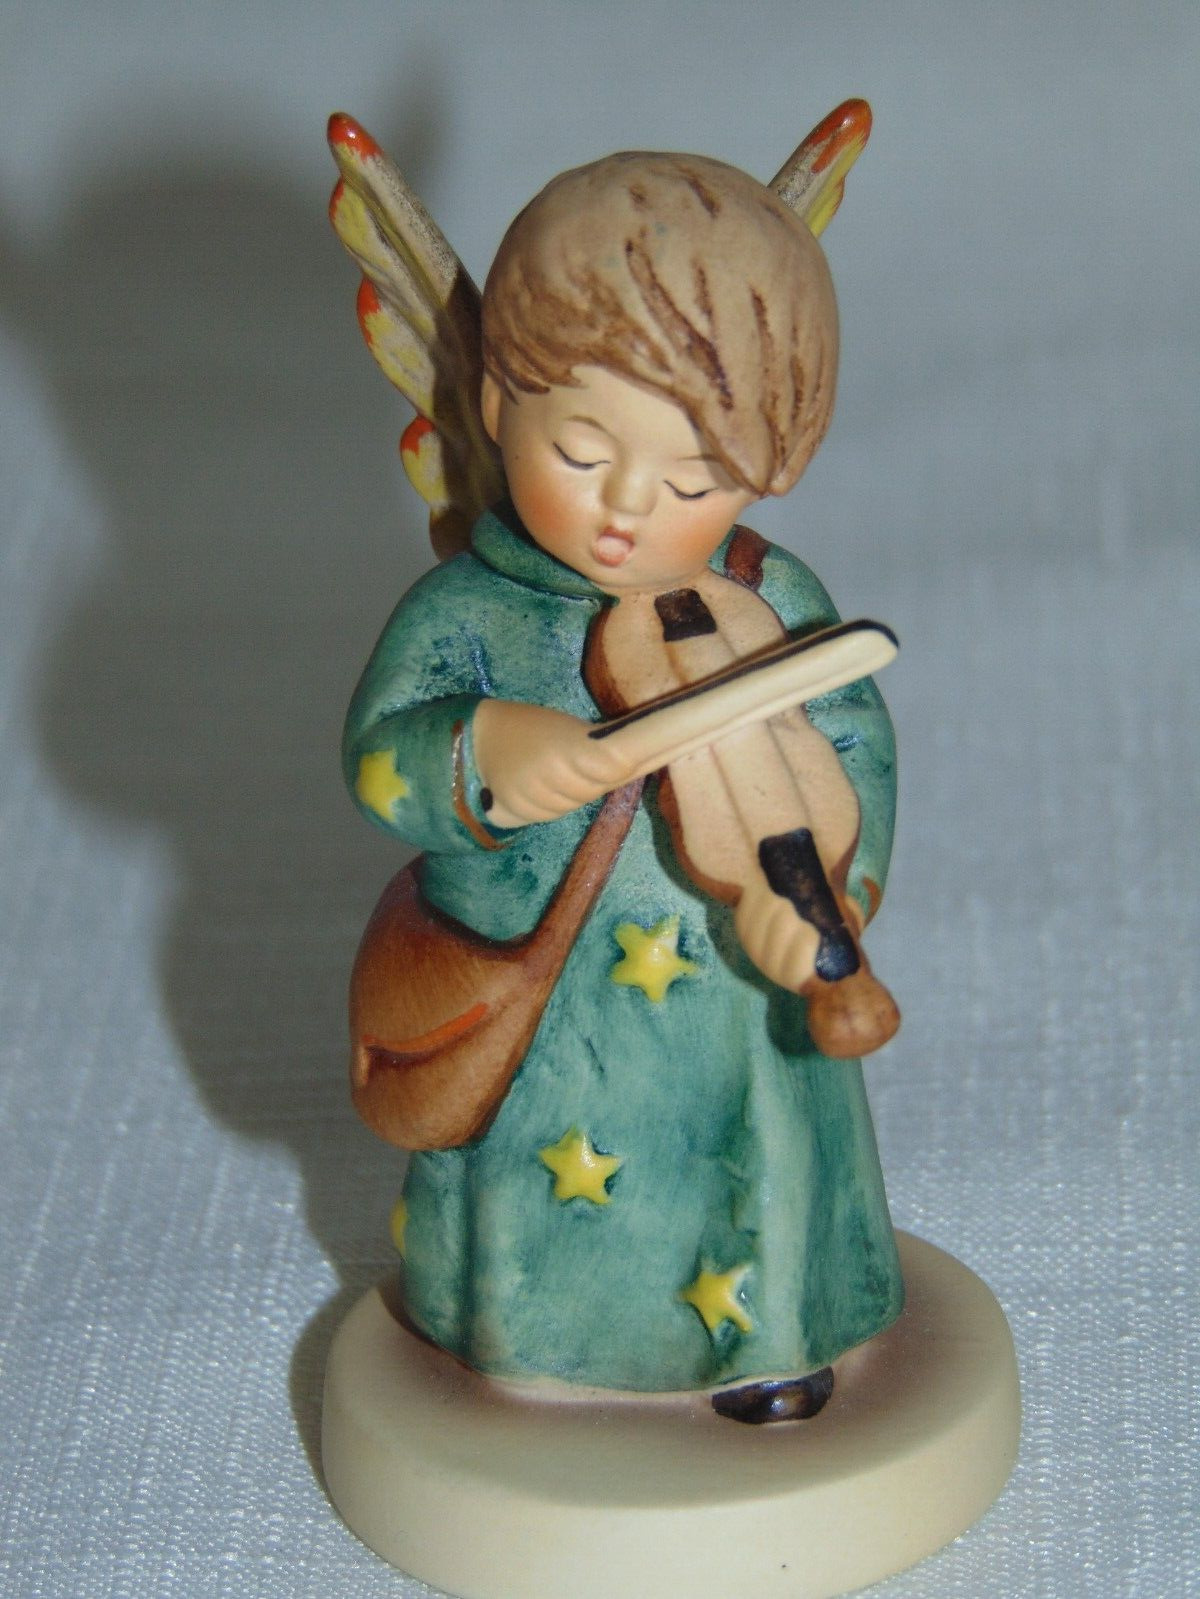 Goebel Hummel First Edition Celestial Musician 646 Ornament Figurine First Issue